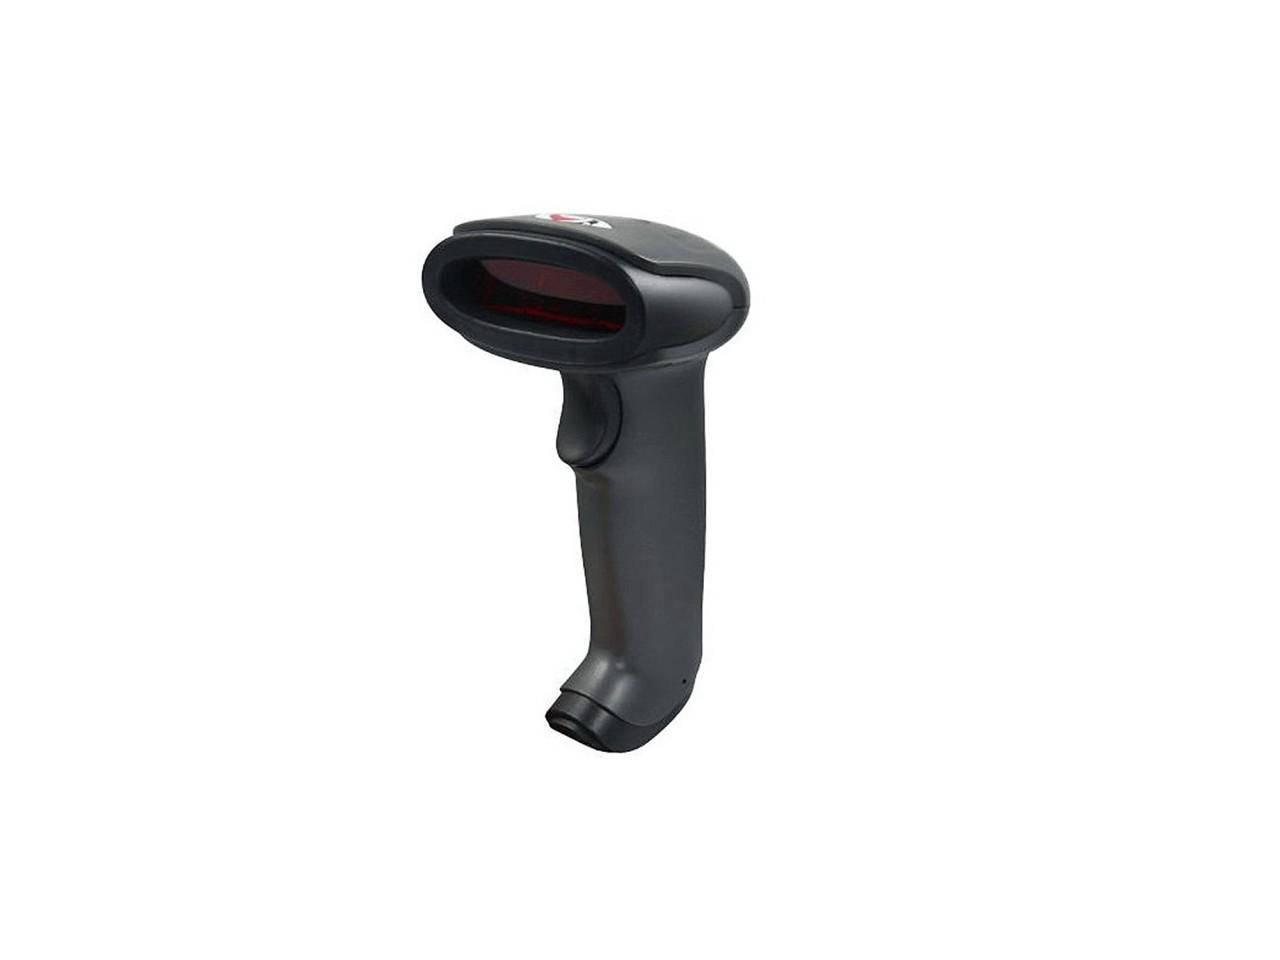 Wasp Wcs3905 CCD Barcode Scanner Handheld Rj45 to USB 633808091040 for sale online 